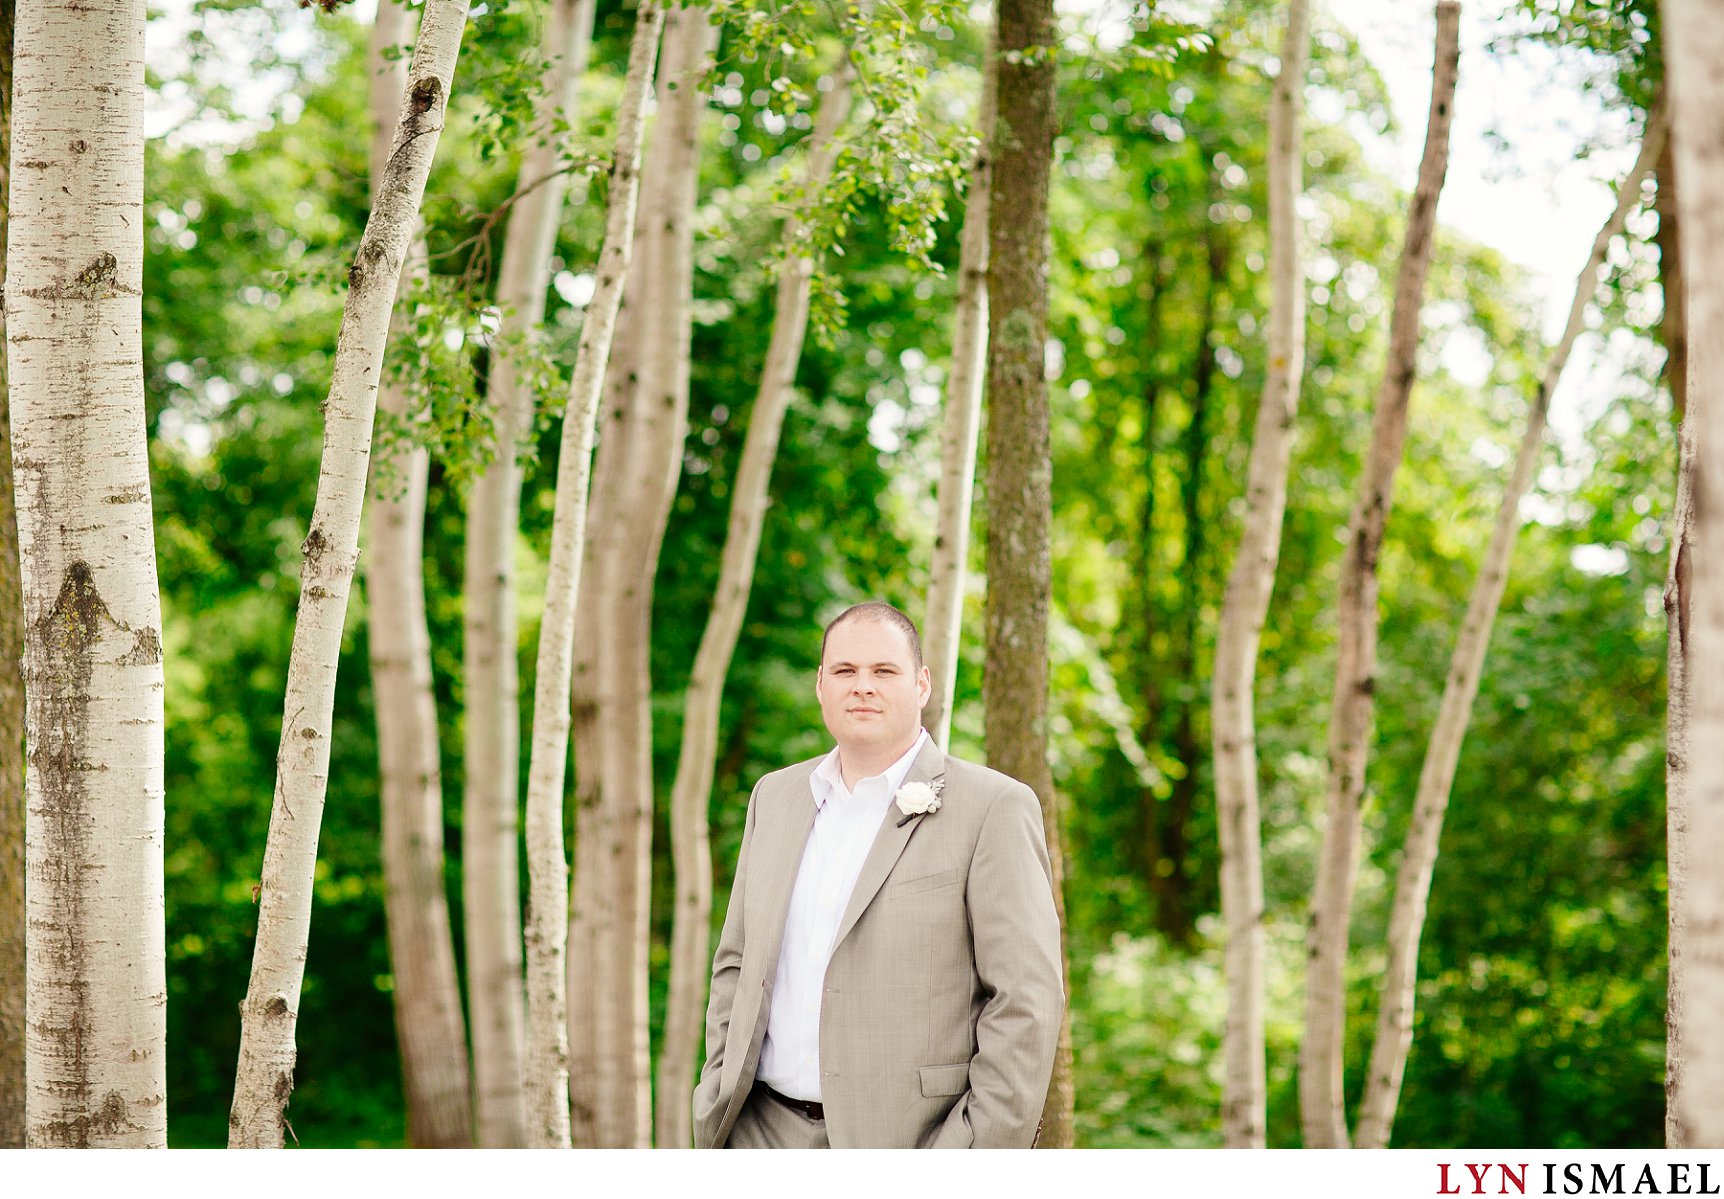 Portrait of the groom among the birch trees at the Holland Marsh Wineries